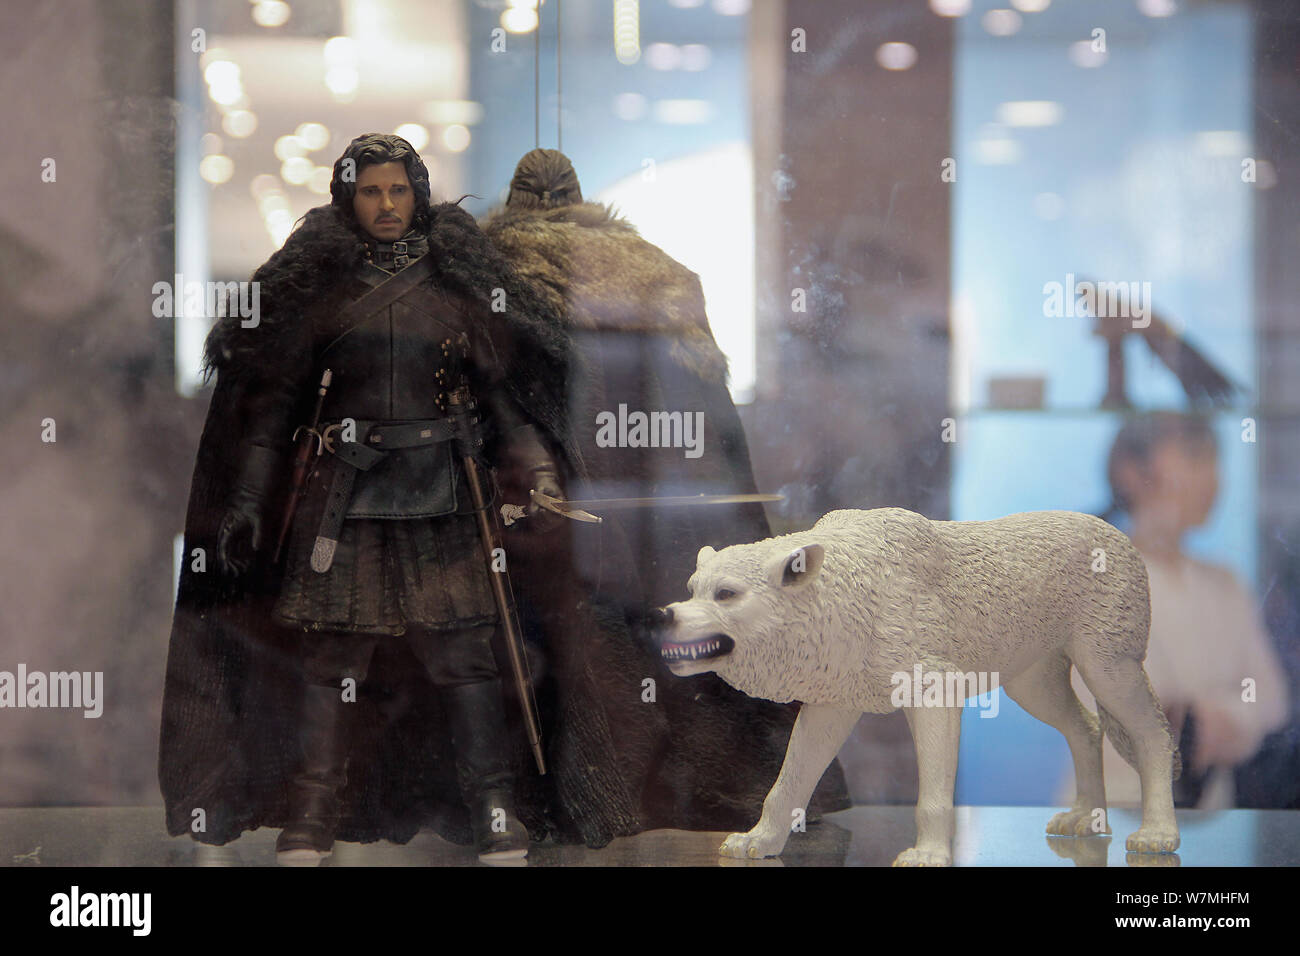 View of a replica of Jon Snow and his Direwolf displayed during the Touring Exhibition of ''Games of Thrones'' at Plaza 66 shopping mall in Shanghai, Stock Photo